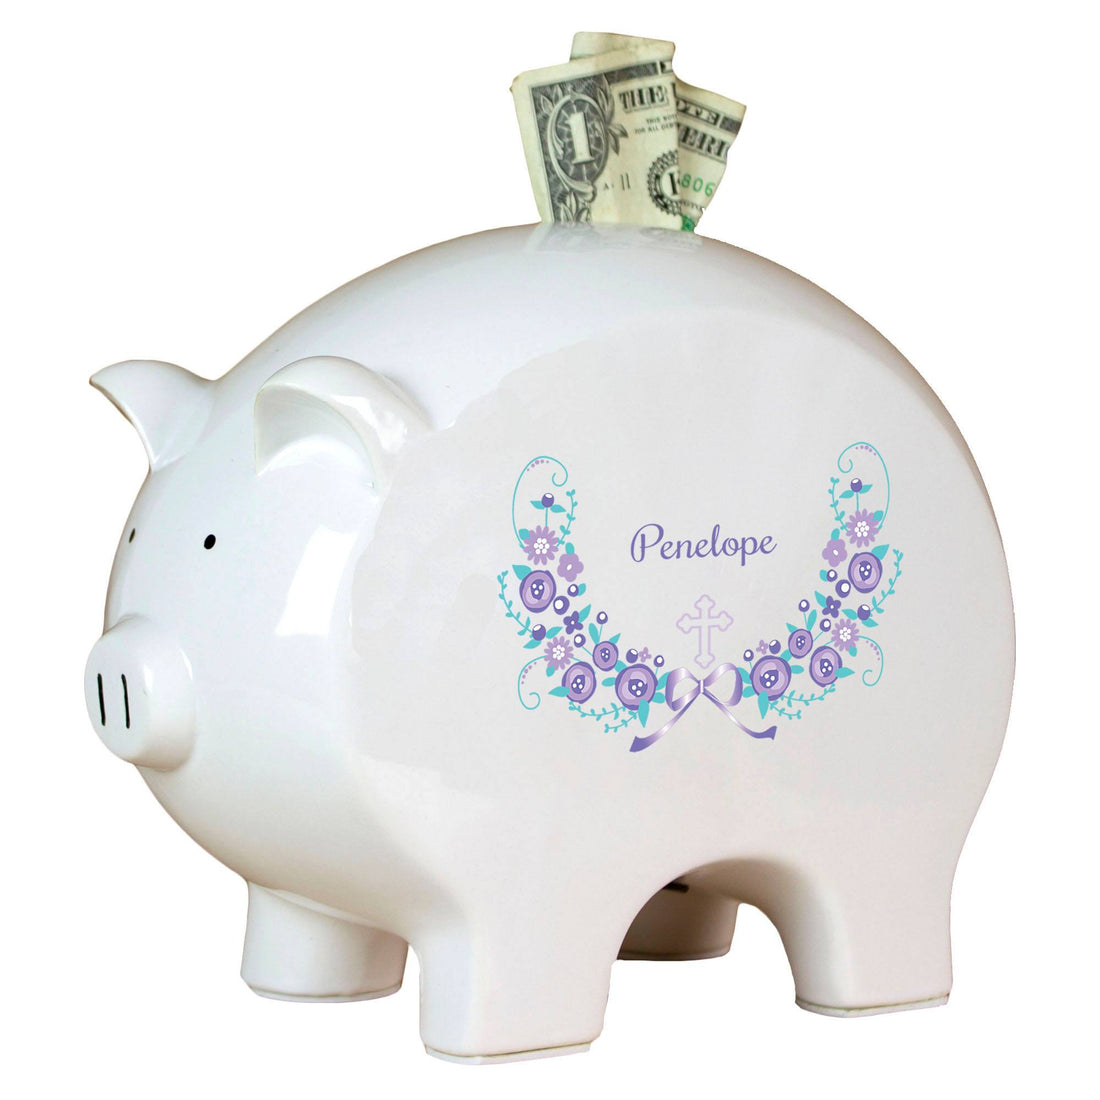 Personalized Piggy Bank with Hc Lavender Floral Garland design